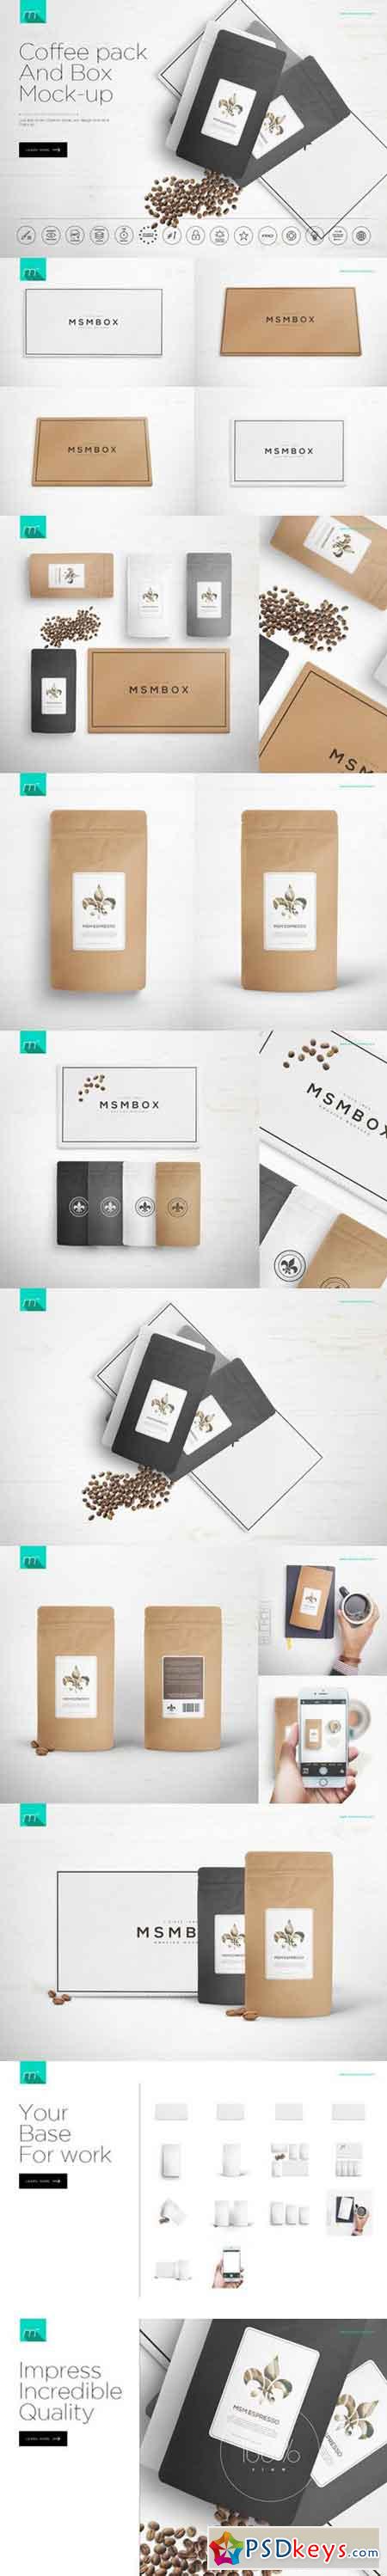 Coffee Pack and Box Mock-up 657975